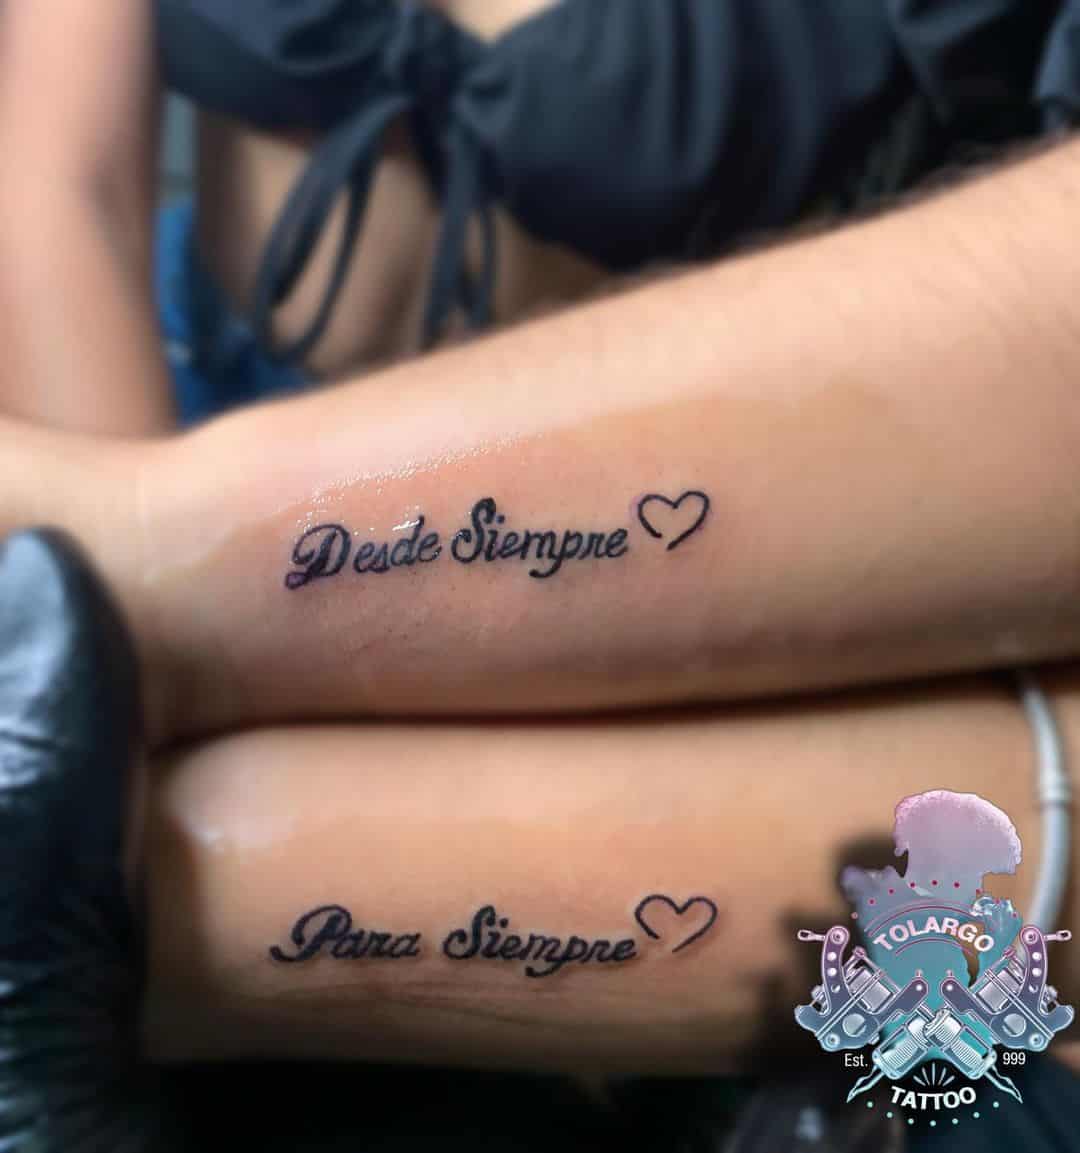 Always&forever matching BFF tattoos